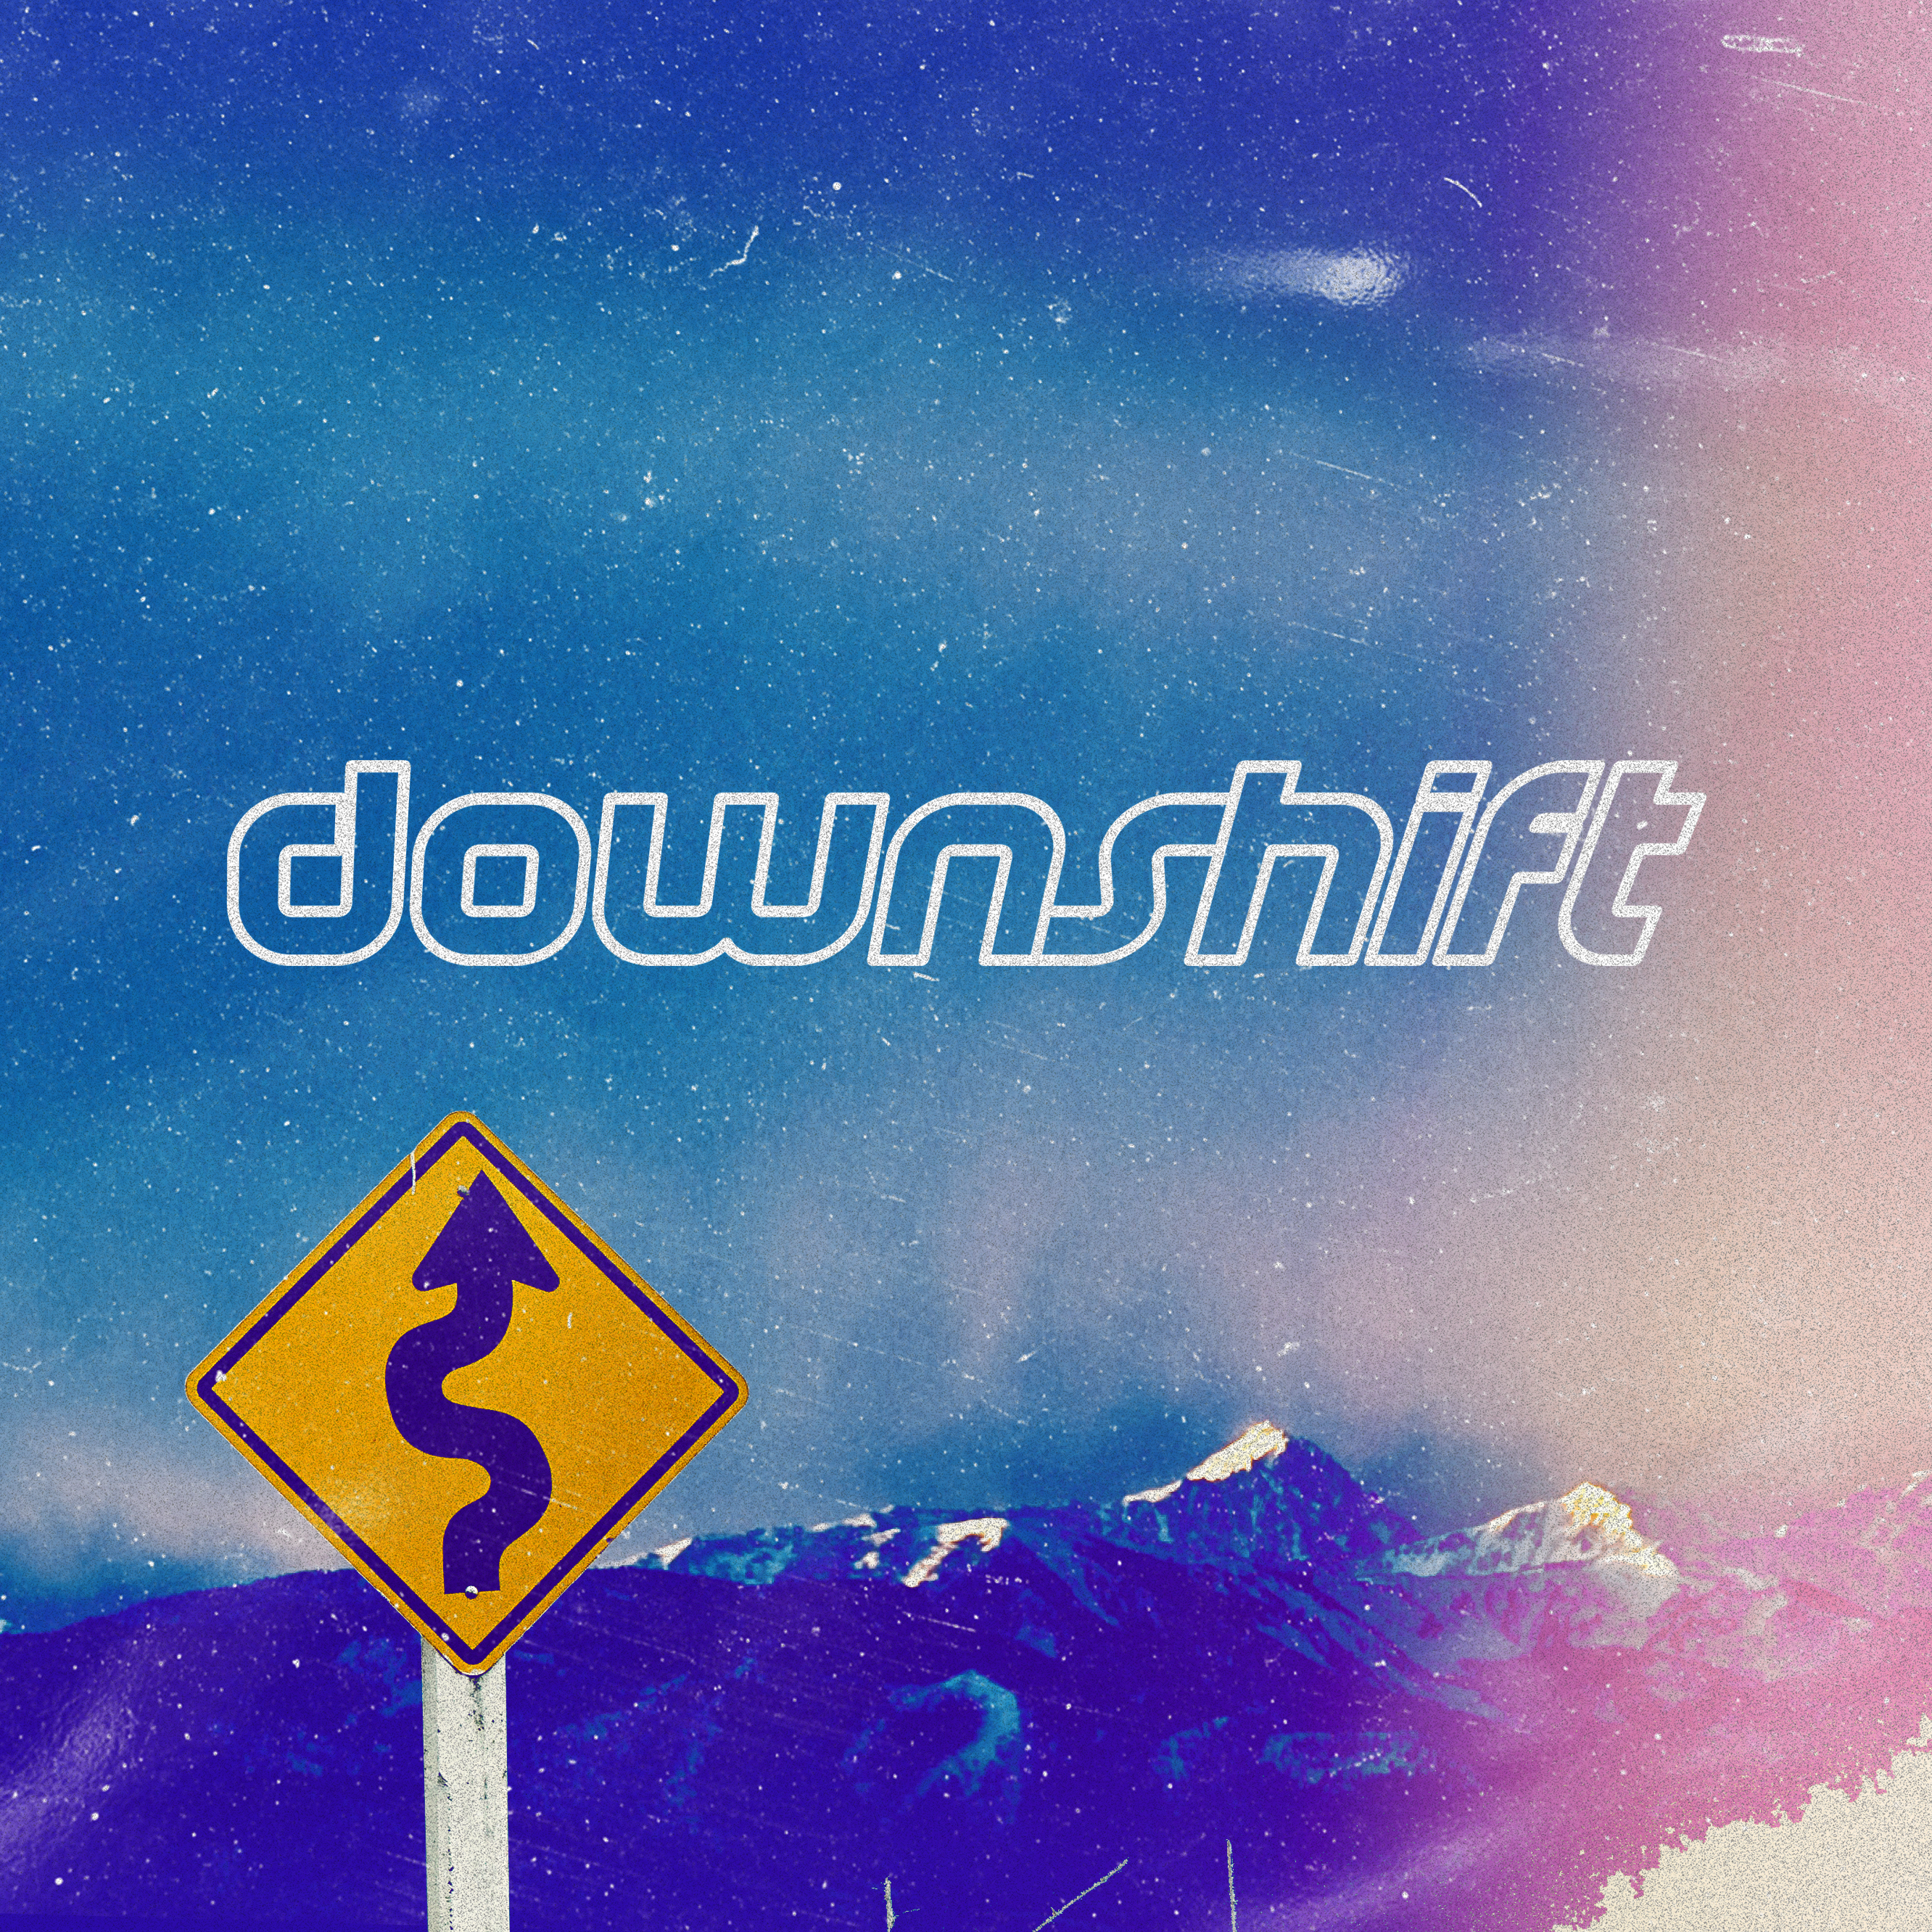 downshift #1: Eliminate Hurry... SLOWING